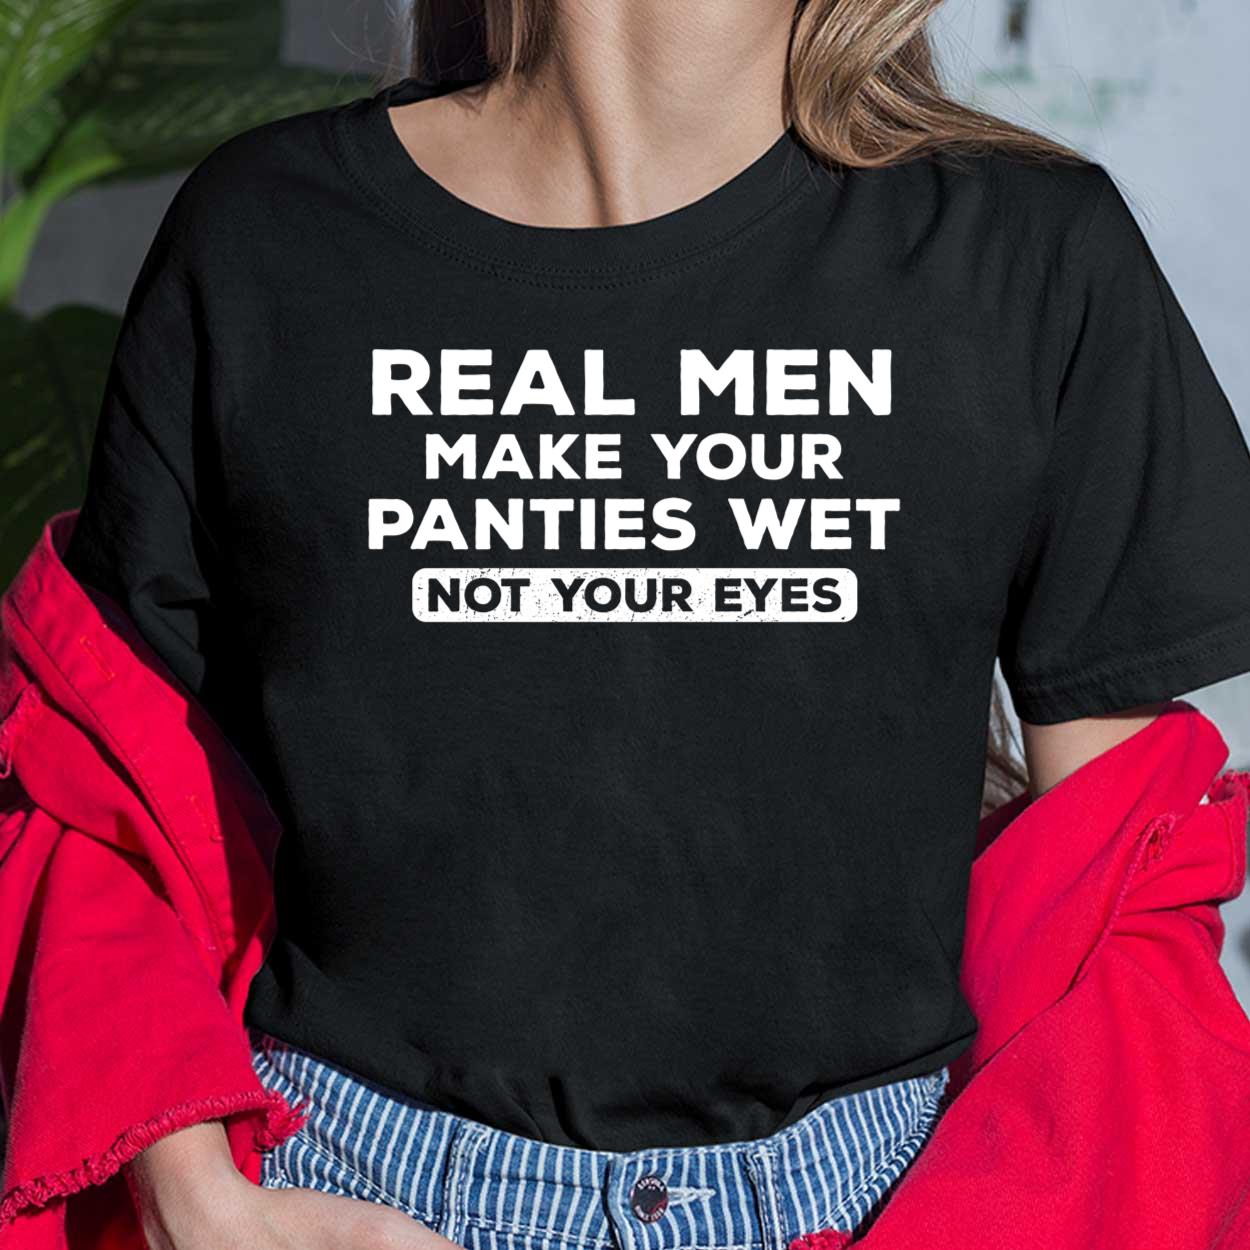 Real Men Make Your Panties Wet Not Your Eyes | Poster